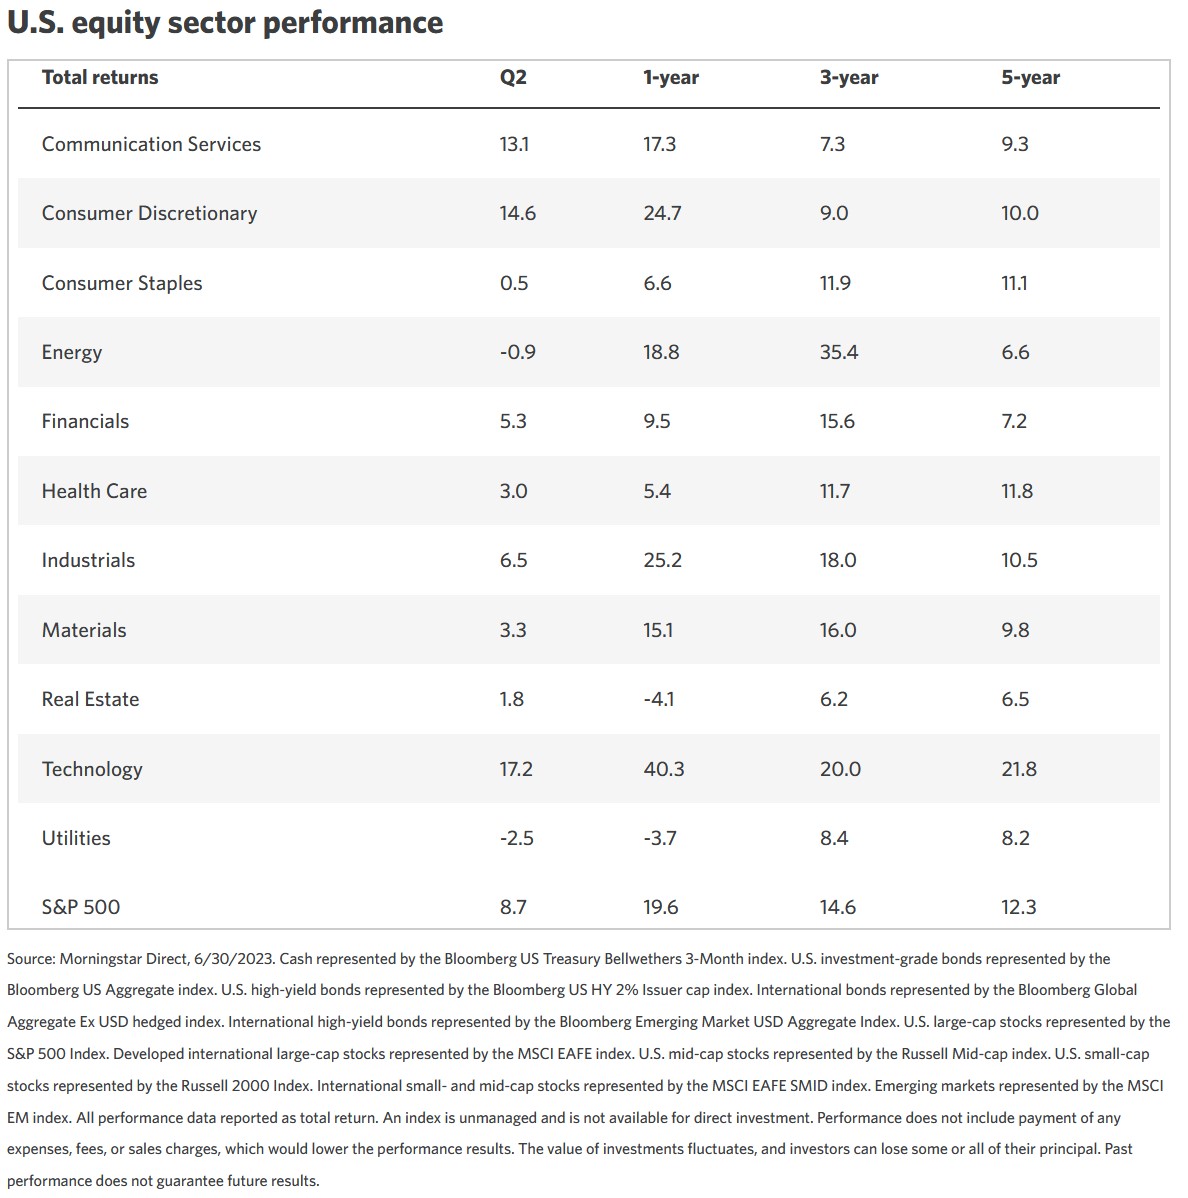 US equity sector performance - Morningstar and Edward Jones